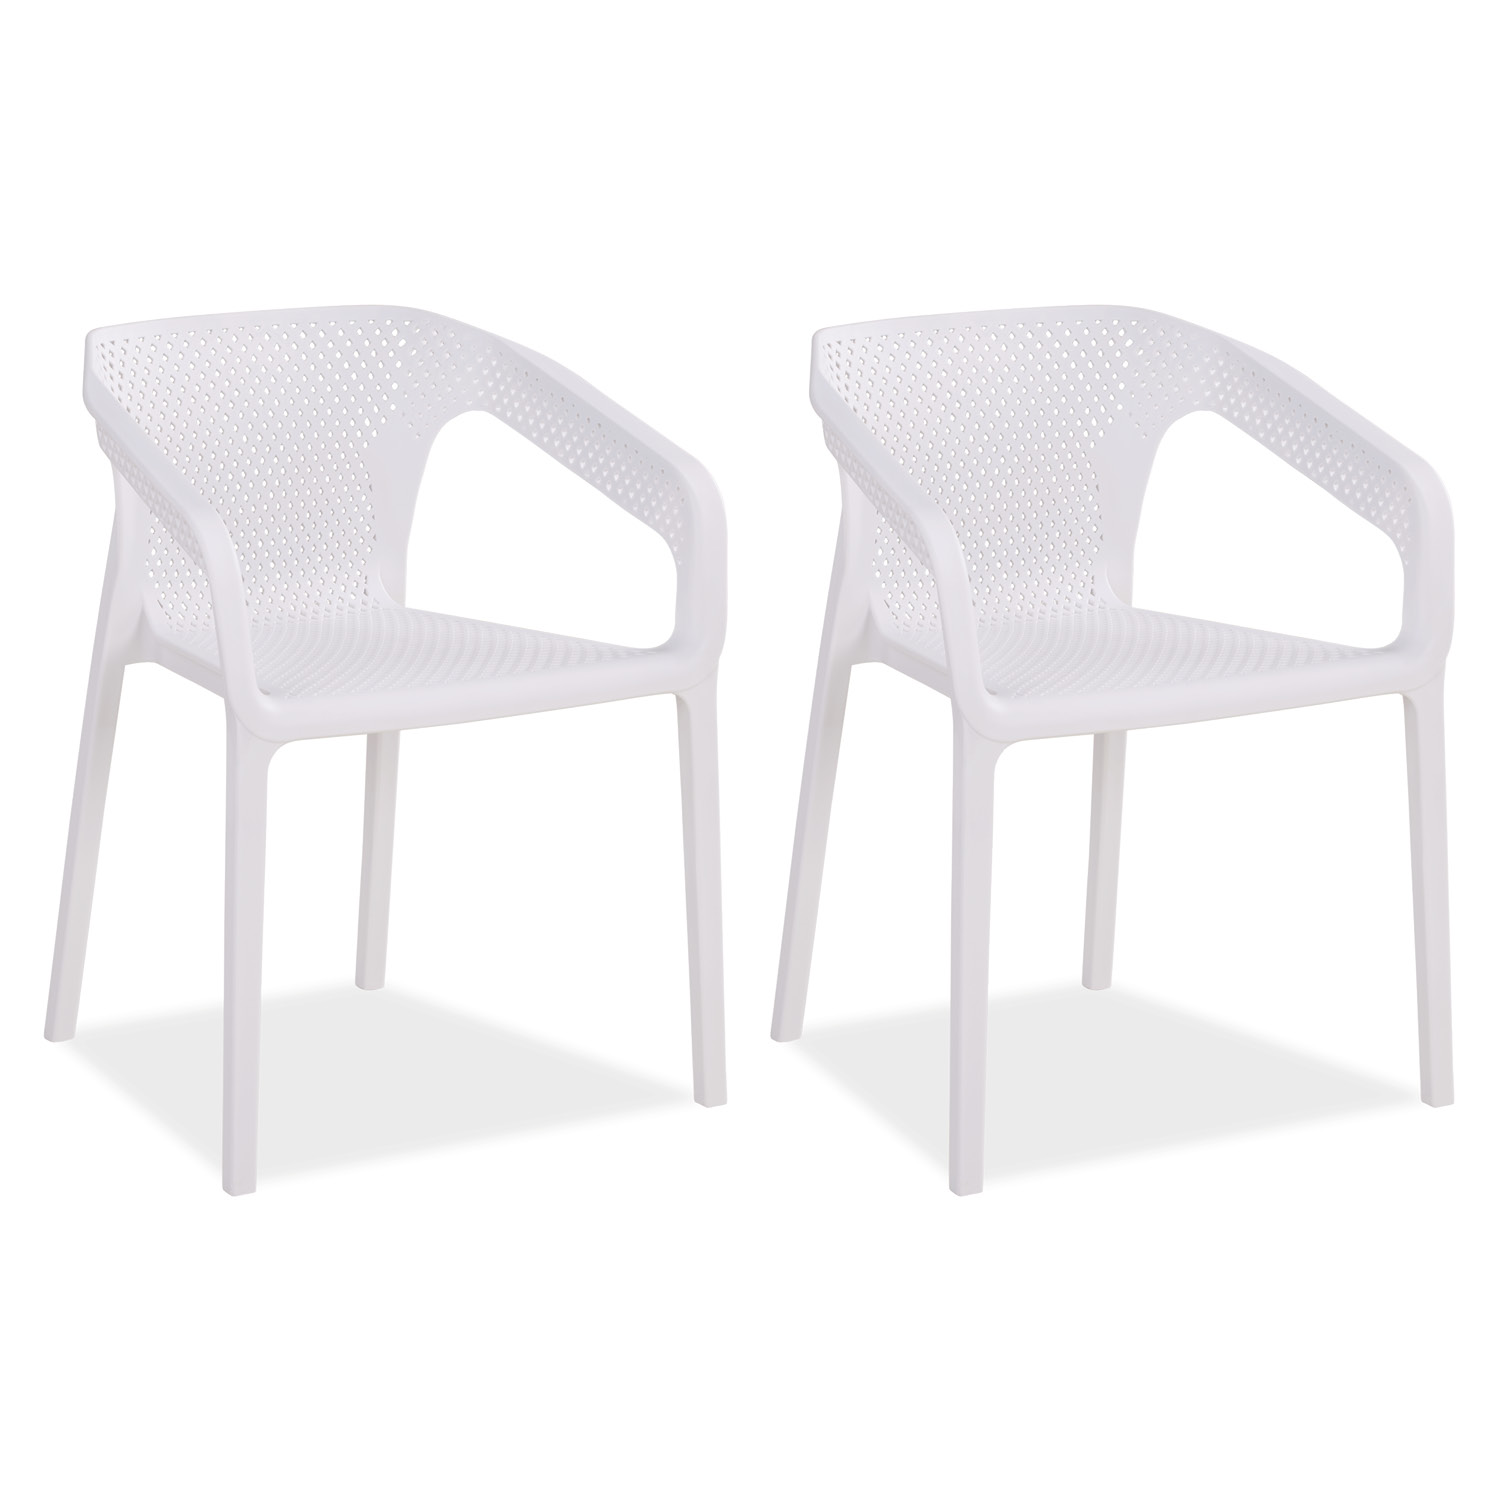 Set of 2 Garden chair with armrests Camping chairs White Outdoor chairs Plastic Egg chair Lounger chairs Stacking chairs